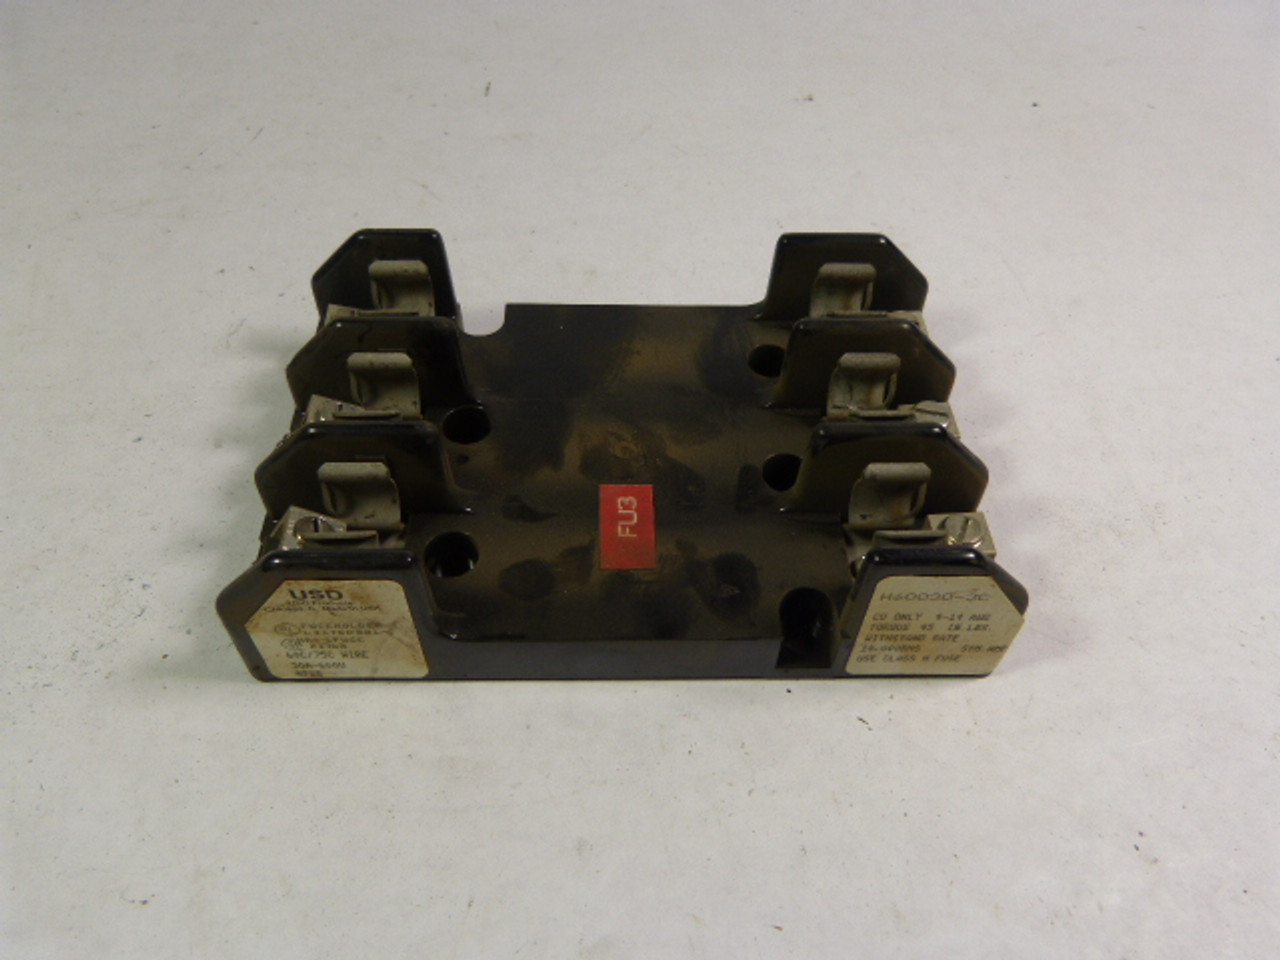 USD H60030-3C Fuse Holder  3-Pole 30A 600V Cosmetic Chips & Scratches USED